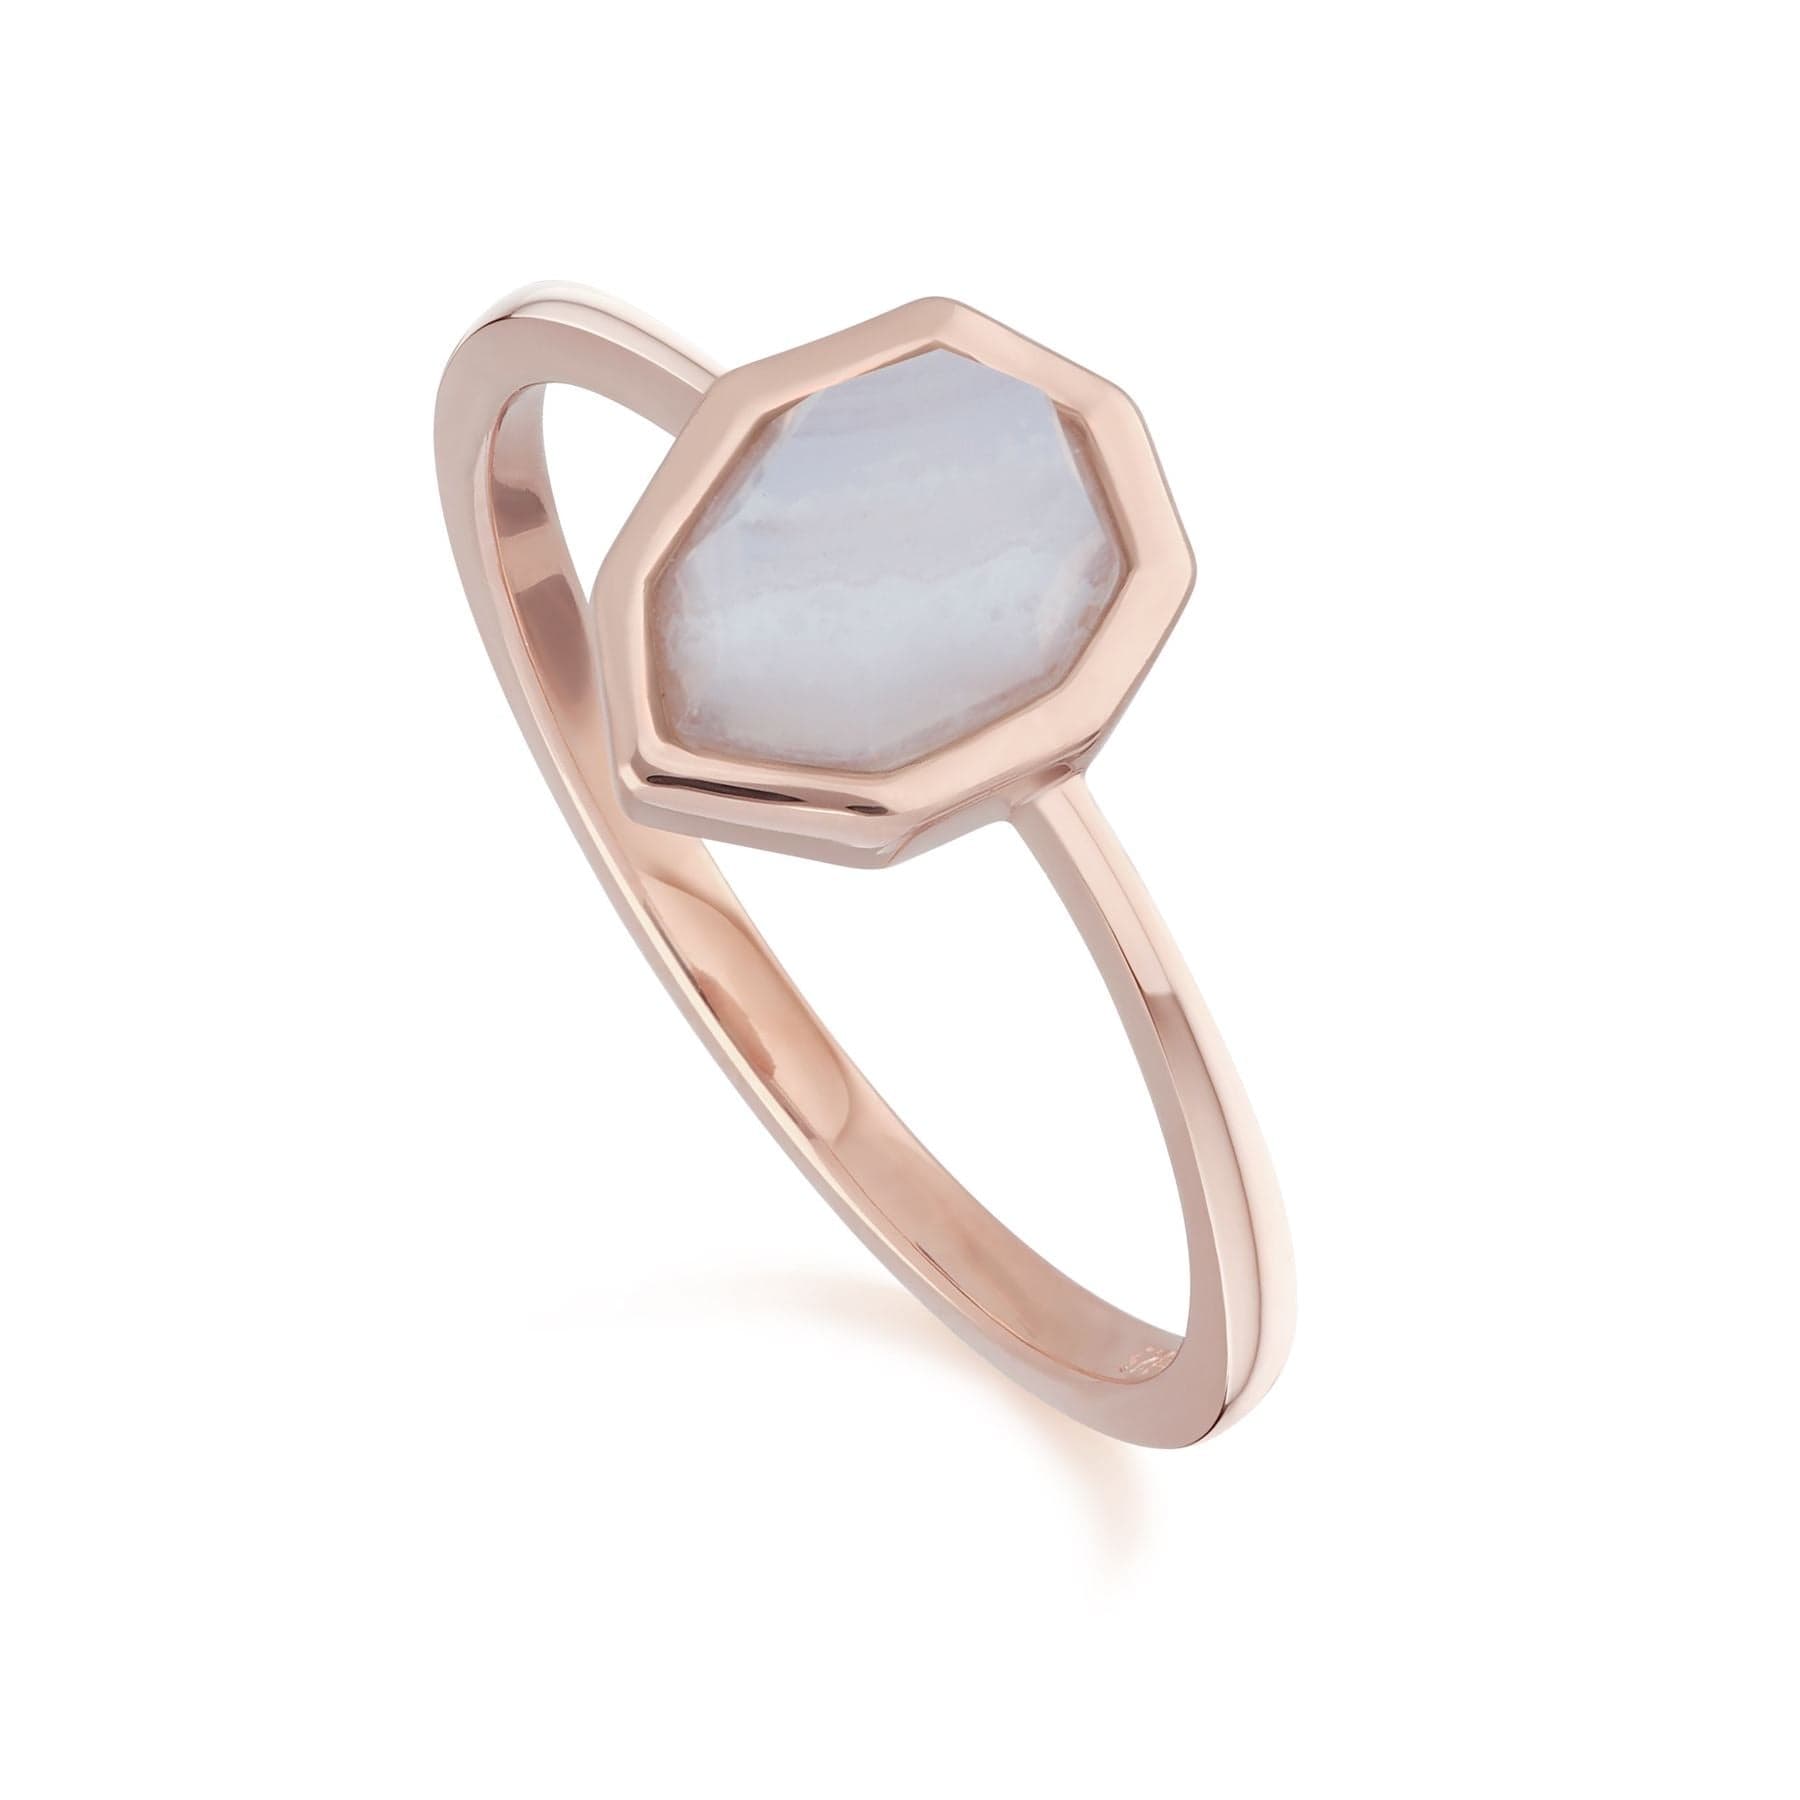 Image of Irregular B Gem Blue Lace Agate Ring in Rose Gold Plated Silver